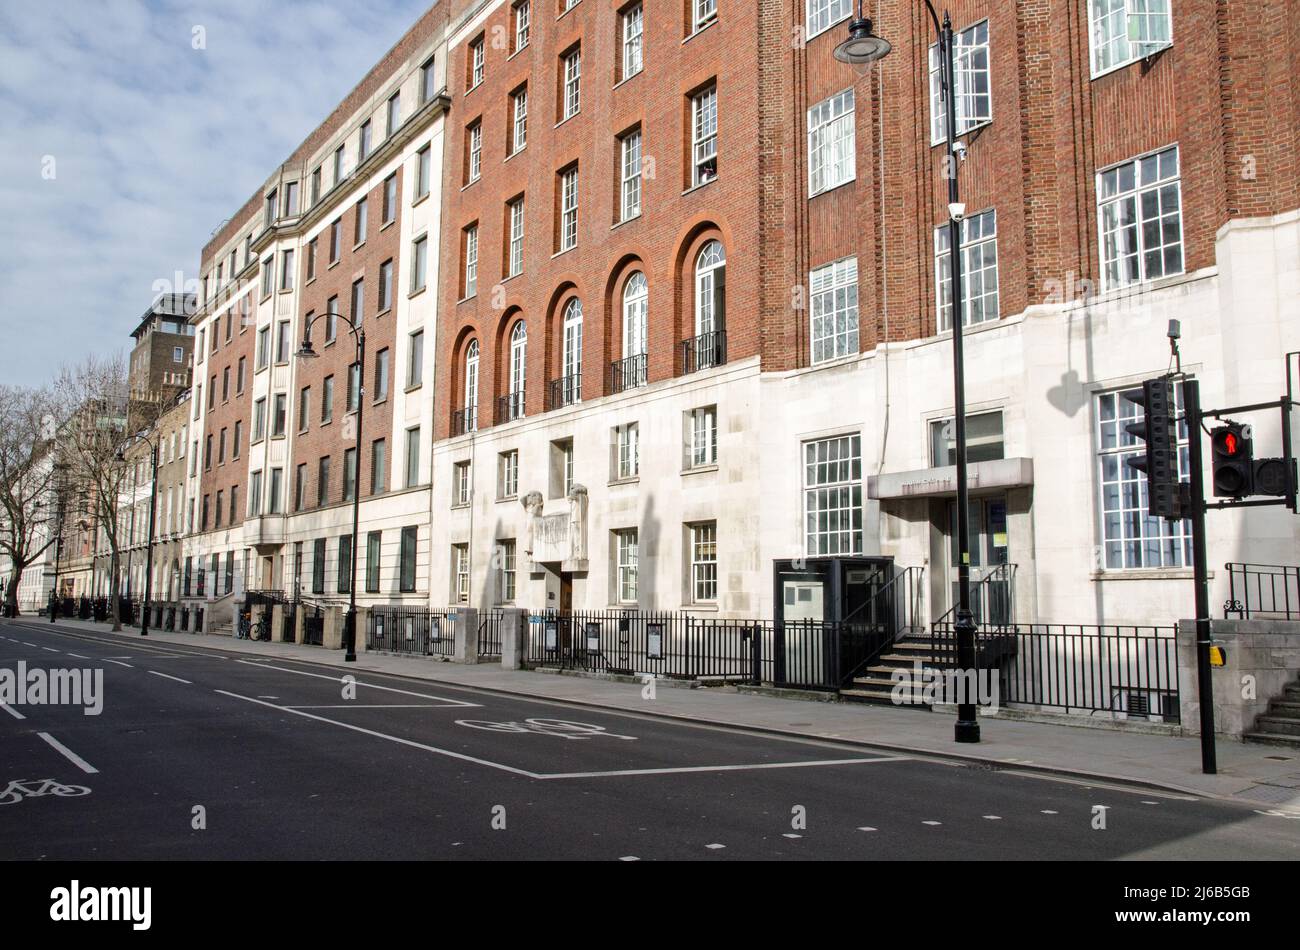 London, UK - March 21, 2022: View looking north along Gower Street in Camden, Central London wiht the headquarters of the Royal Academy of Dramatic Ar Stock Photo